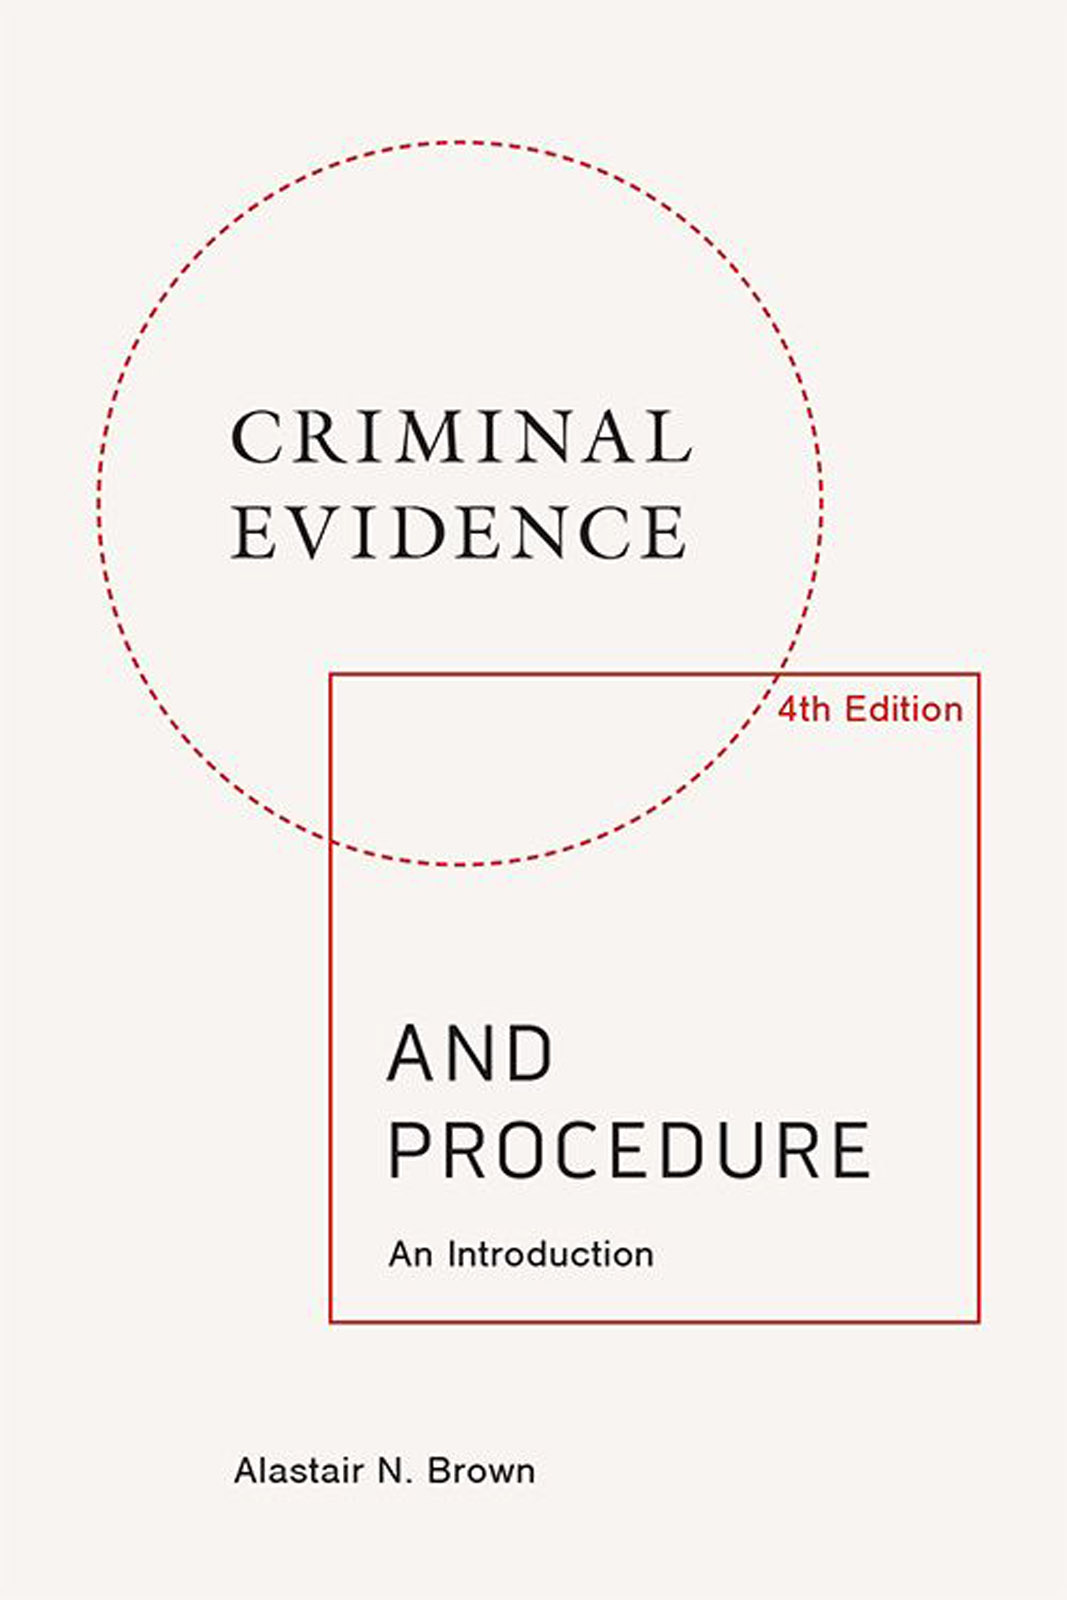 Cover, Criminal Evidence and Proceedure by Alastair N Brown